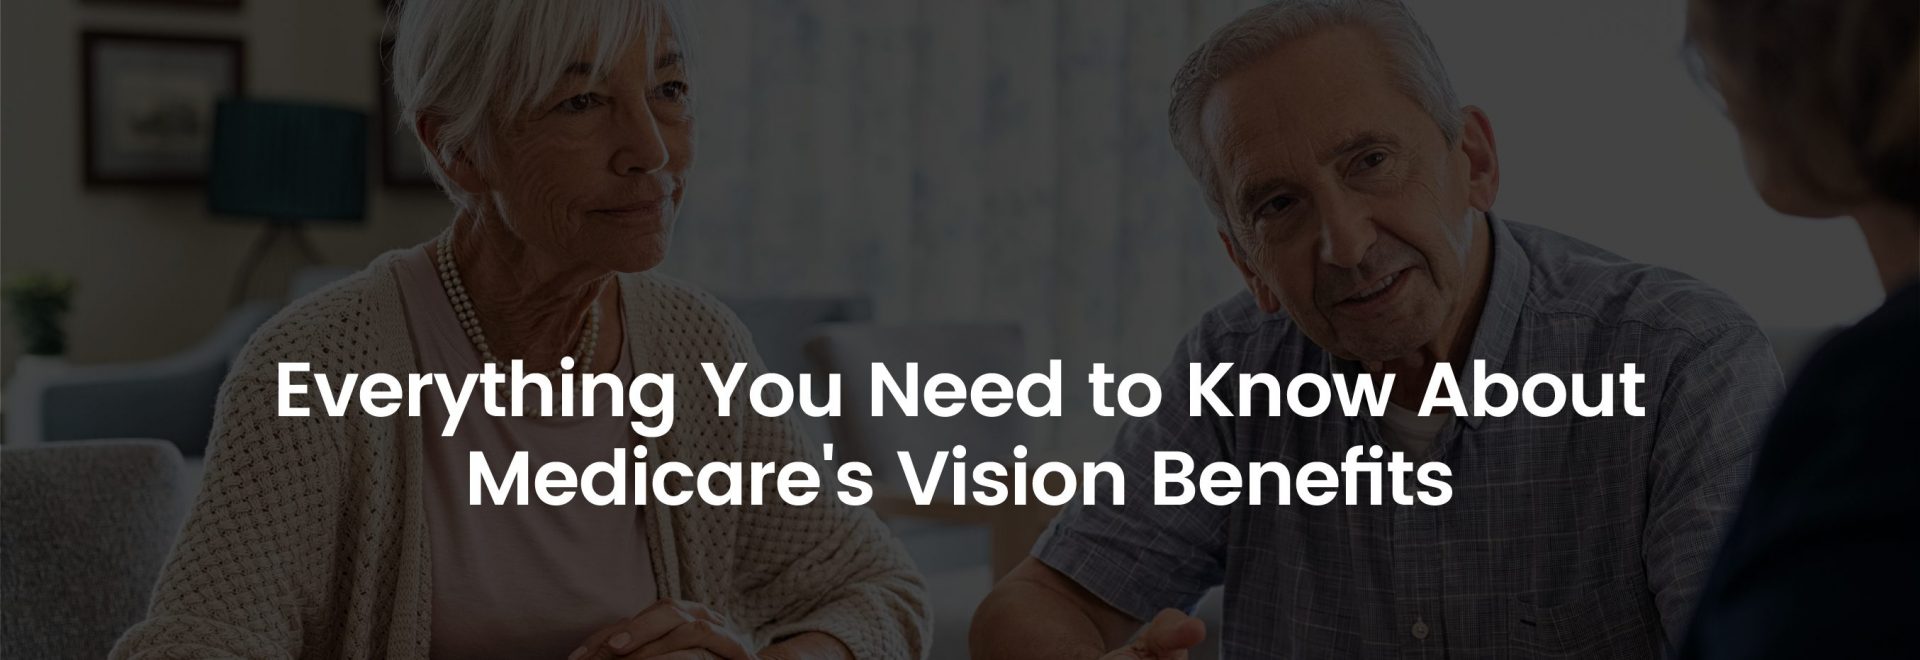 Everything You Need to Know About Medicare’s Vision Benefits | Banner Image